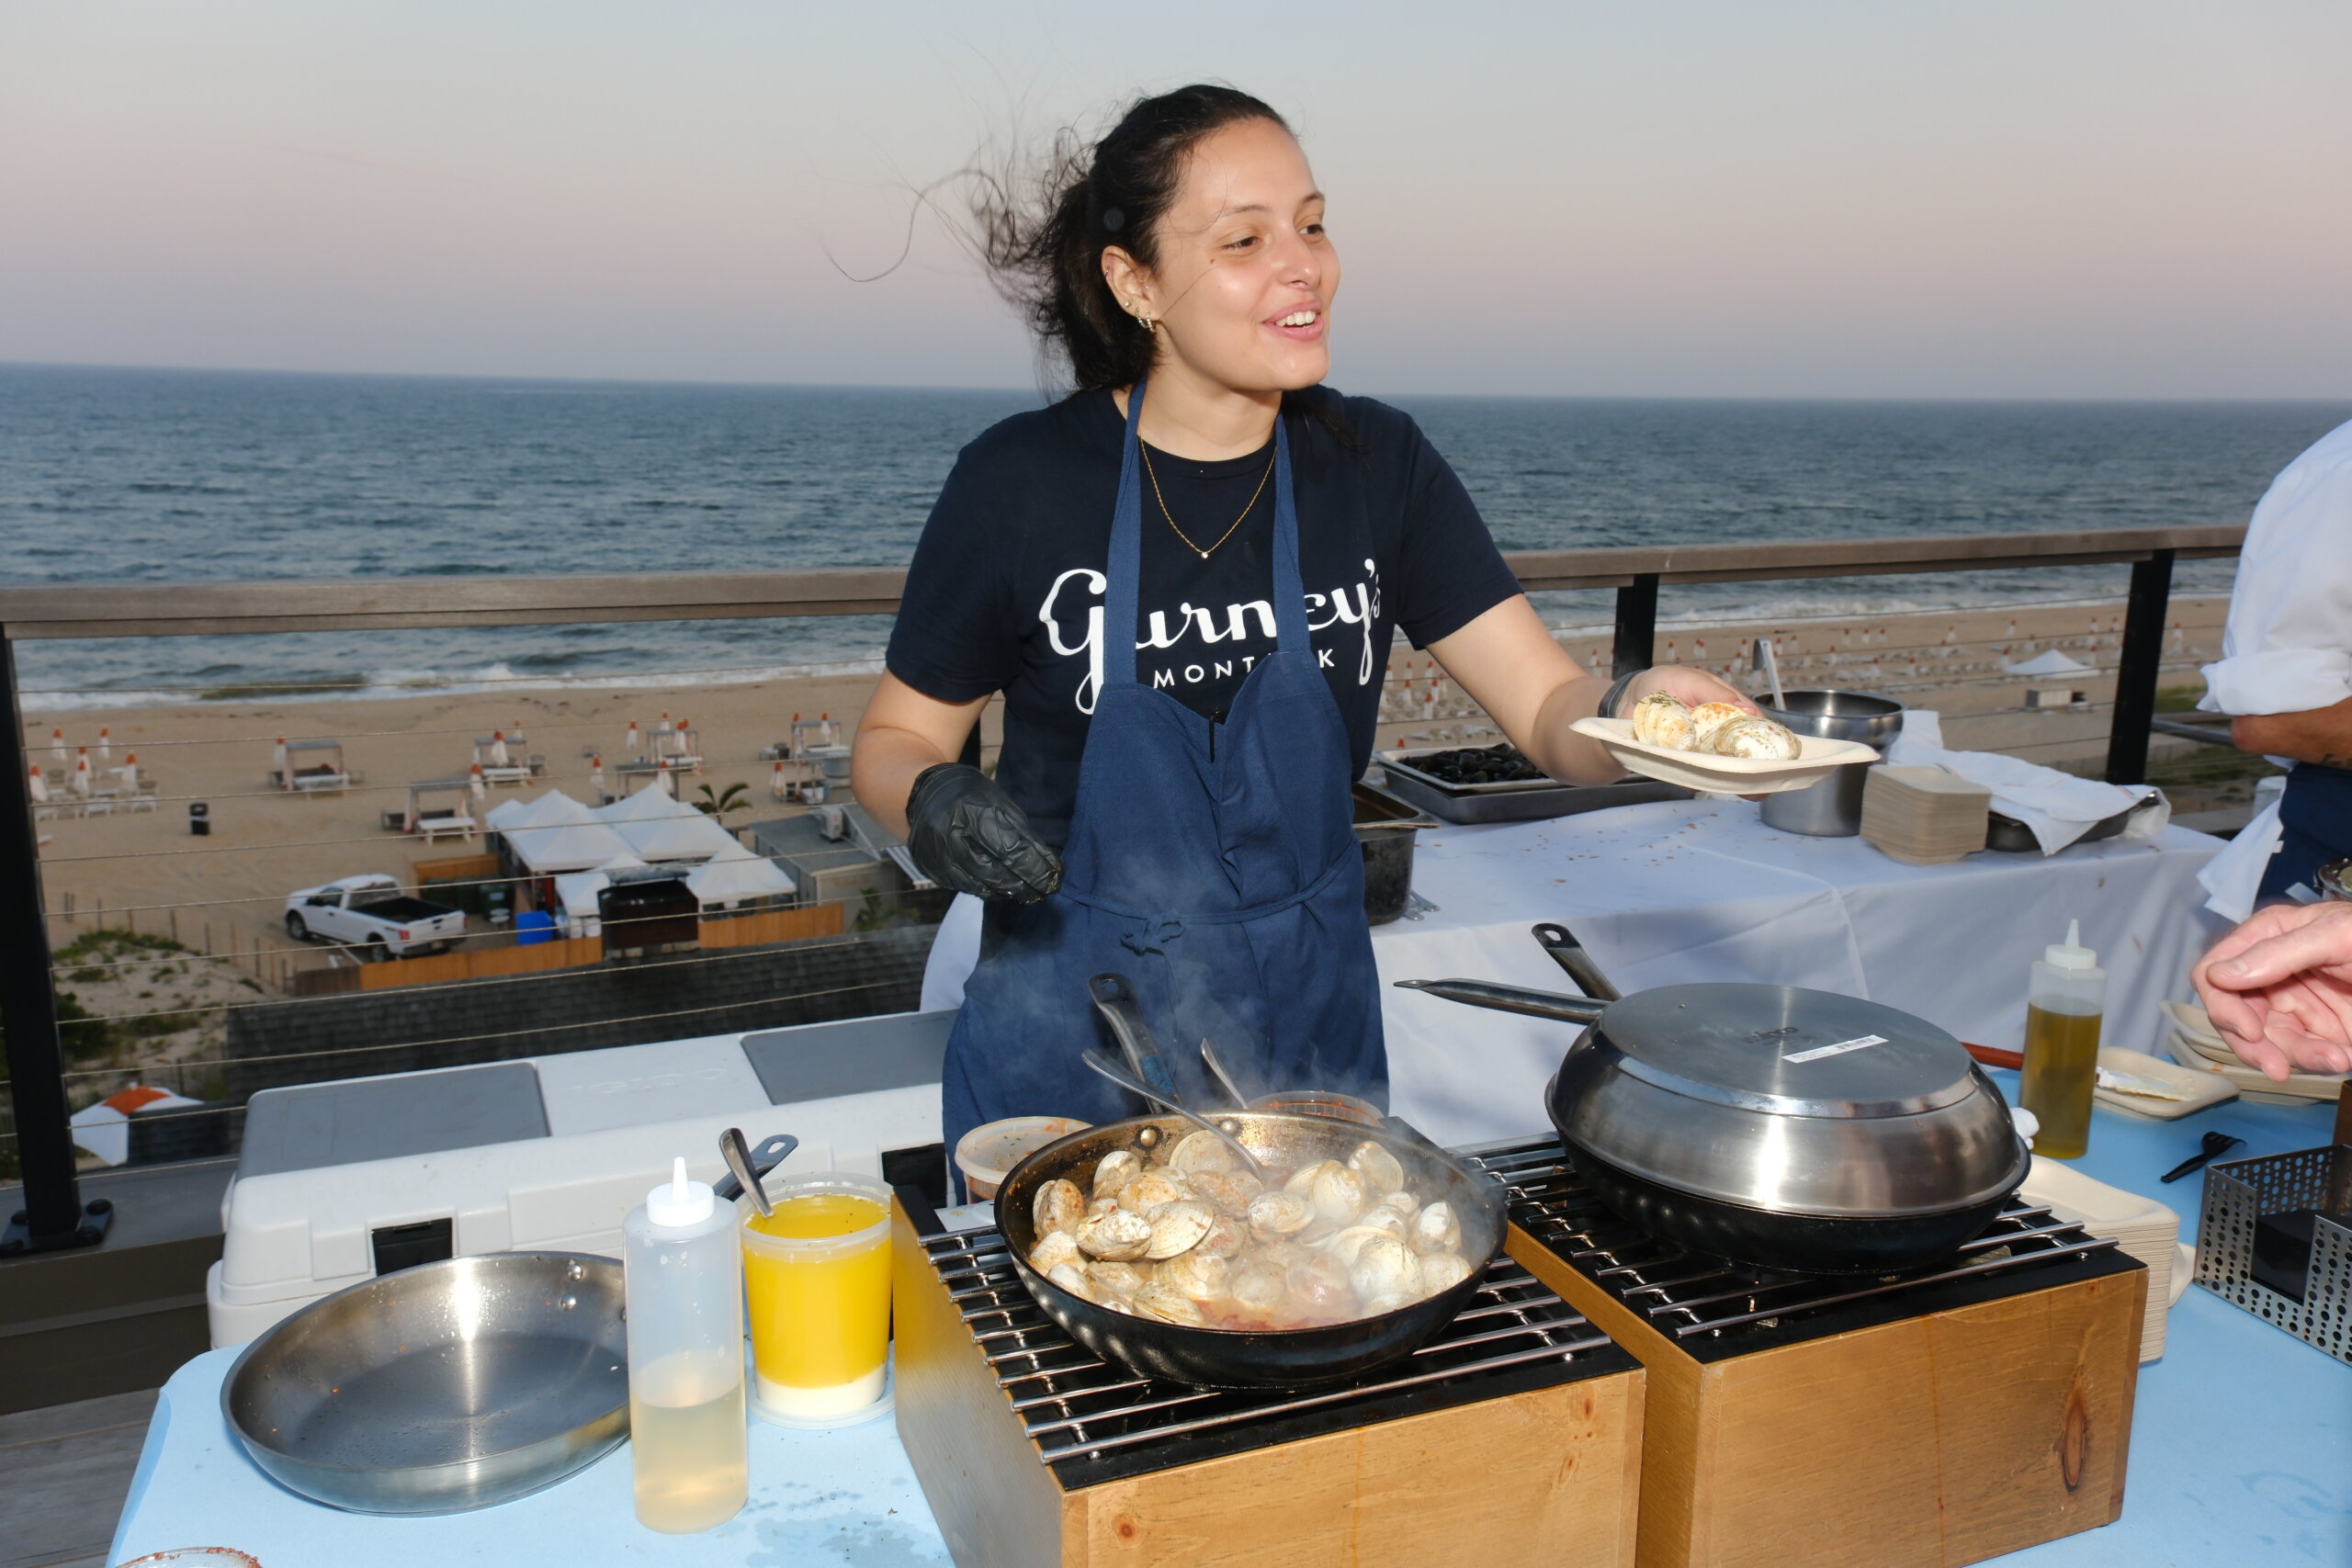 Gurney's Montauk was home to Dan's Clambake, the ultimate seaside summer soiree on Thursday, July 13